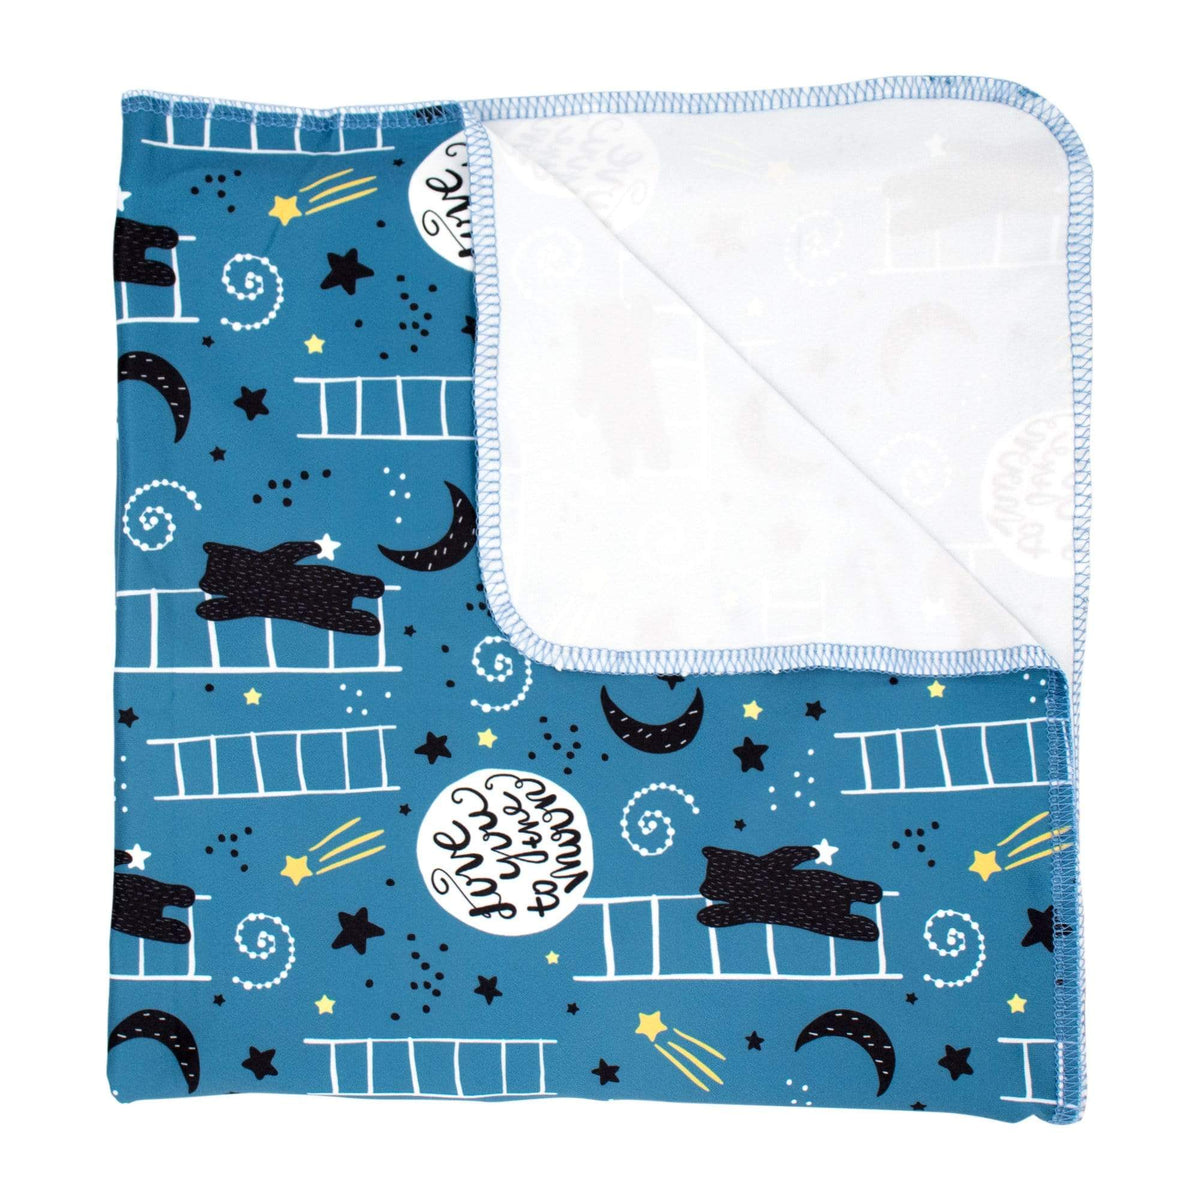 CLEARANCE: Imagine Baby Stretchy Swaddle Blanket To the Moon